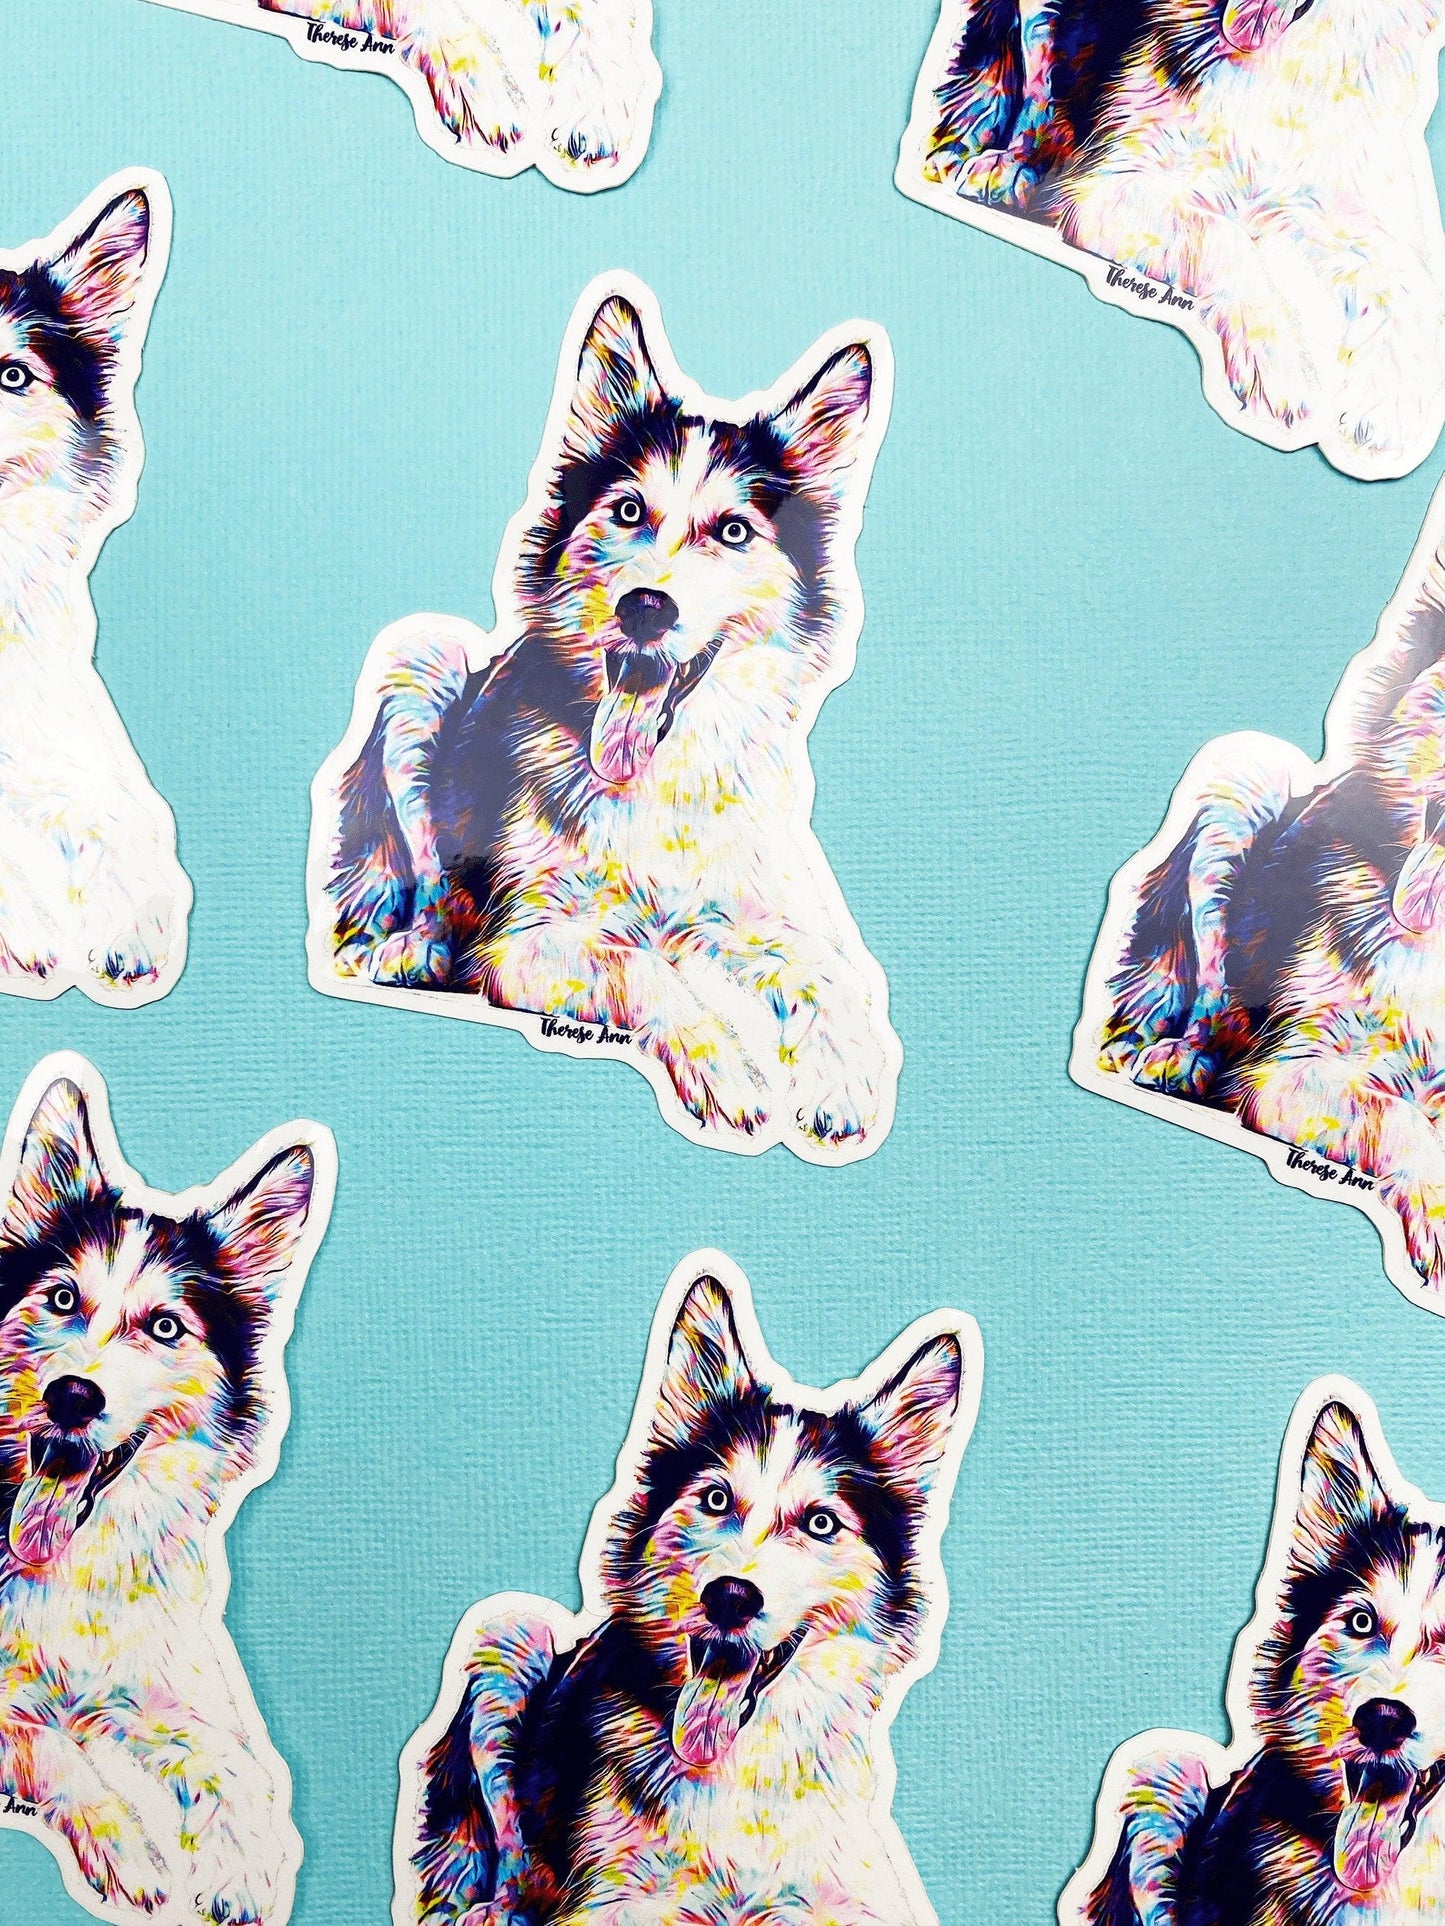 Husky Sticker Colorful Abstract Cute Husky Dog Decal for Car, Hydroflask, Husky Gift, Husky Baby, Husky Puppy, Husky Mom Gift - Ottos Grotto :: Stickers For Your Stuff